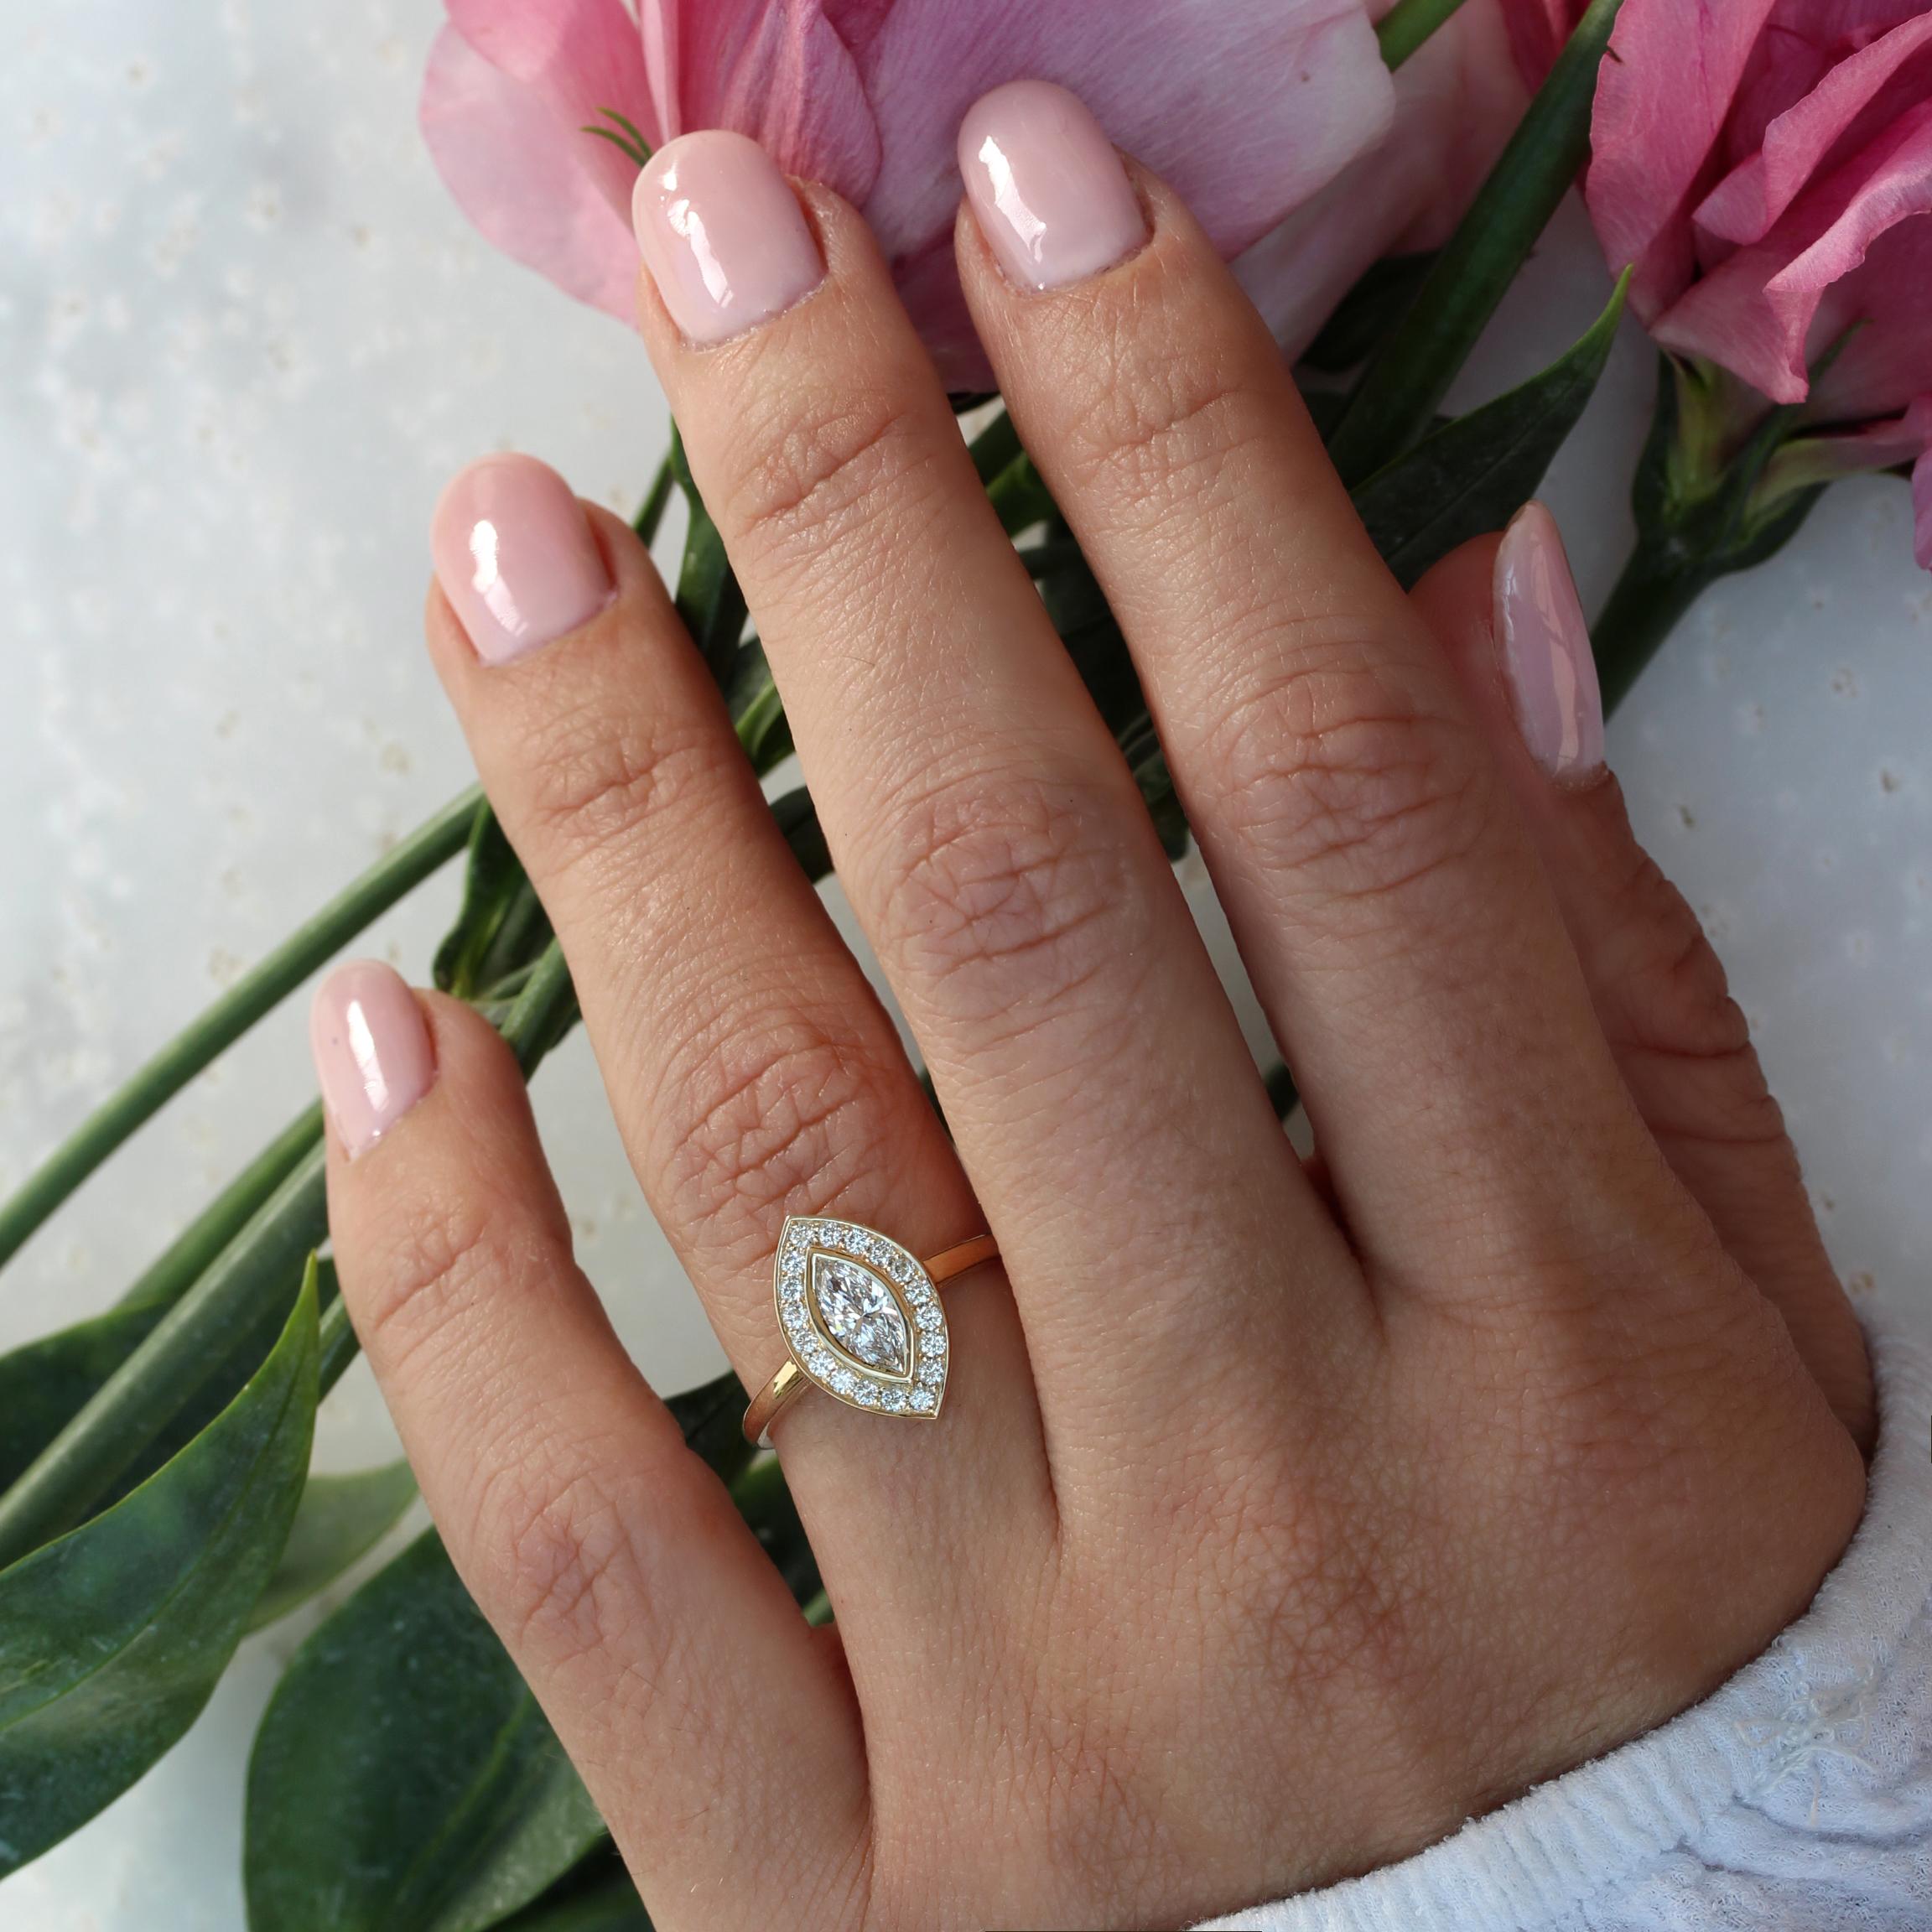 Marquise-shaped diamond, bezel setting ring - Classic and Elegant.
This list is for the engagement ring only.
This ring is made to order. Handmade with care. 

Details: 
* Center Stone Shape: Marquise. 
* Center Stone Type: Natural diamond, 0.5